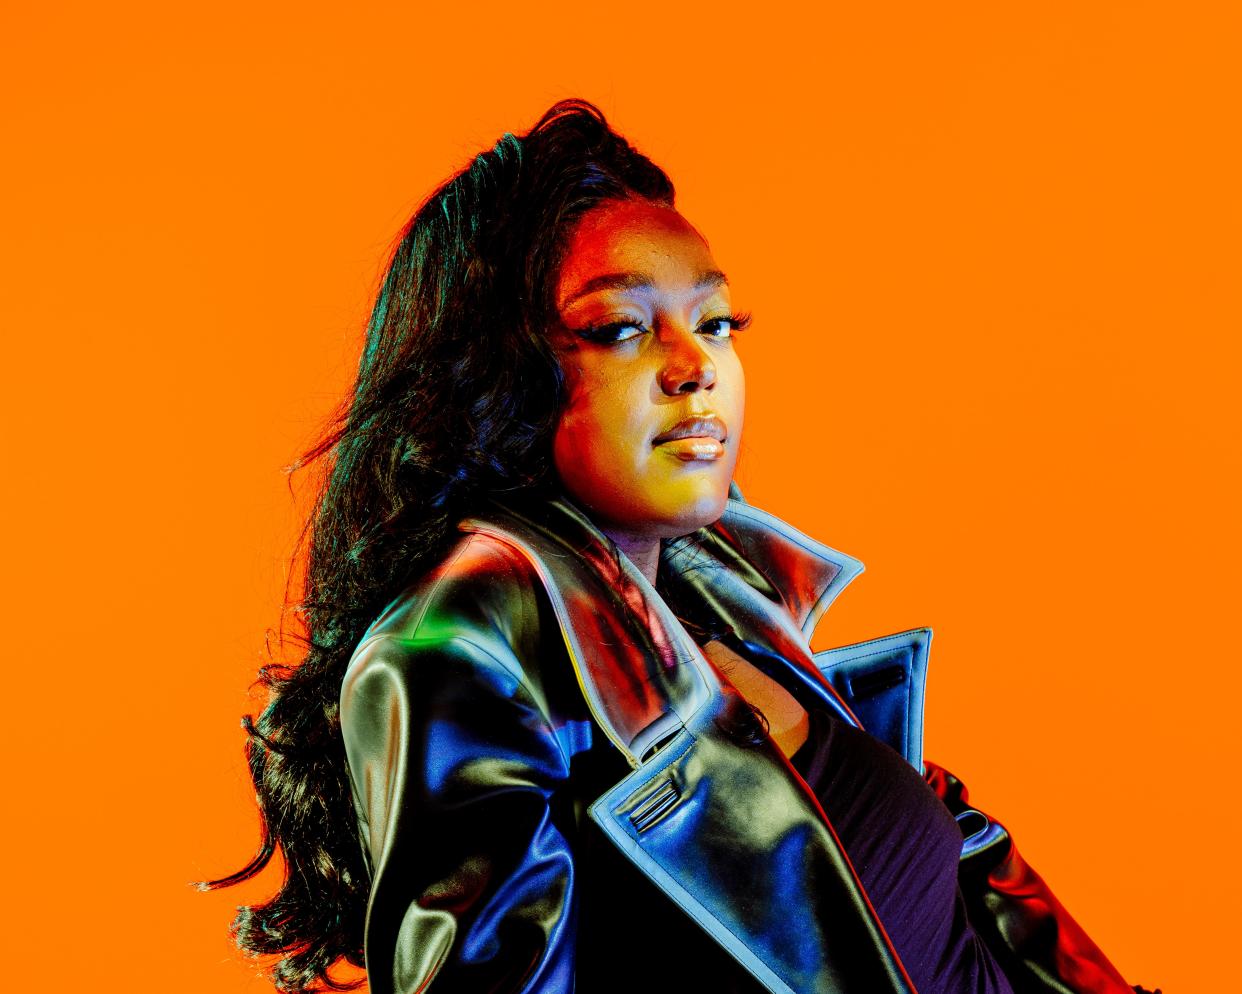 Anifa Mvuemba poses in a black leather coat against a neon orange backdrop.